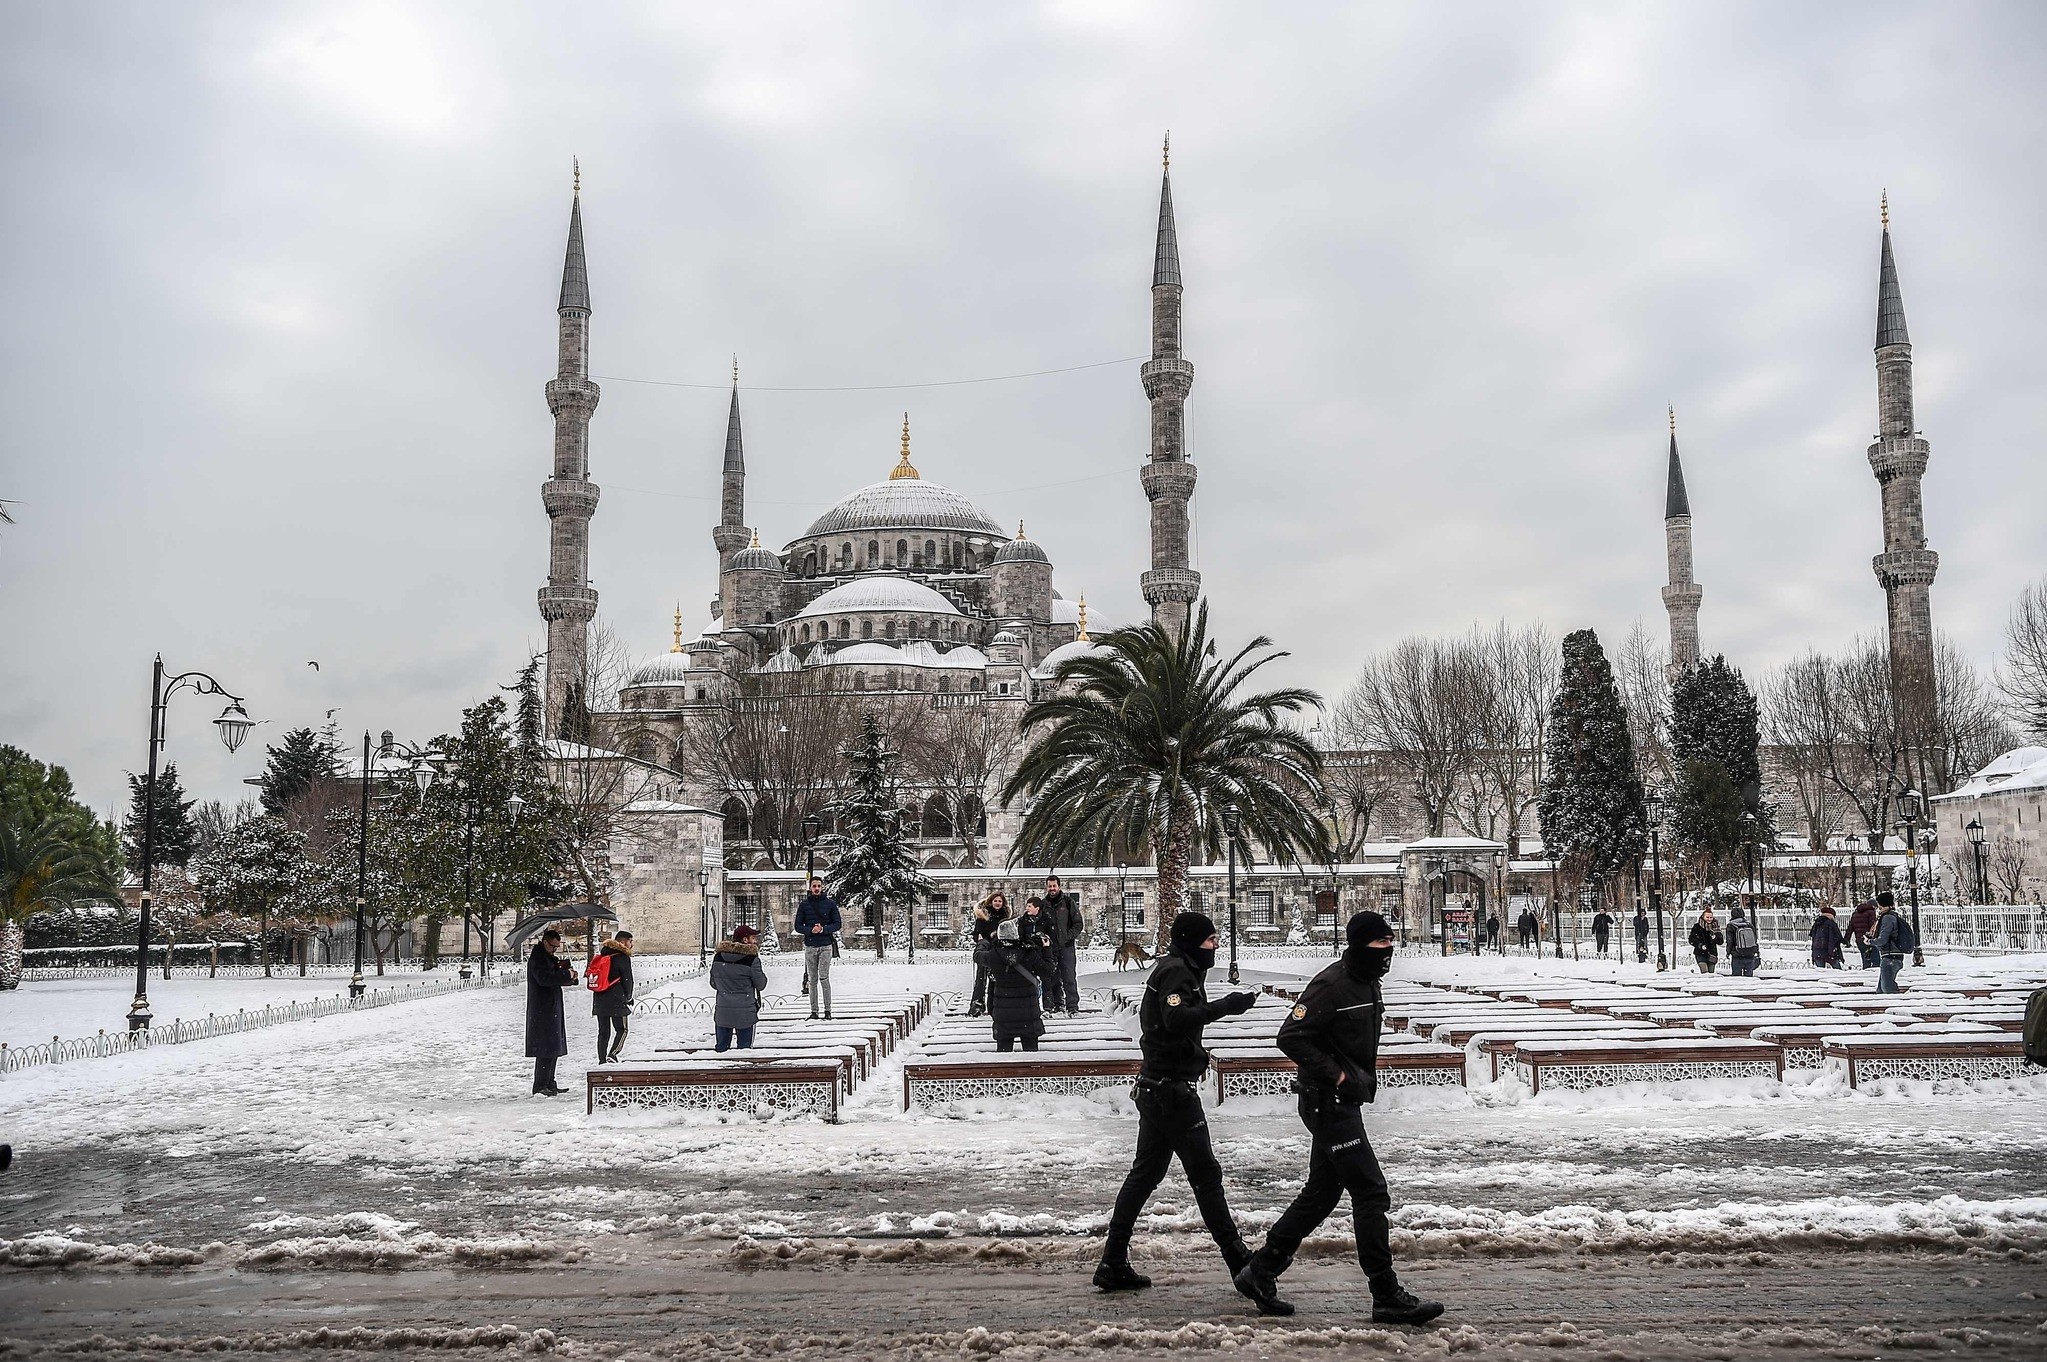 Turkish anti riot police officers patrol around the Blue mosque (Sultan Ahmet) during snowfall in Istanbul on January 8, 2017. (AFP Photo)